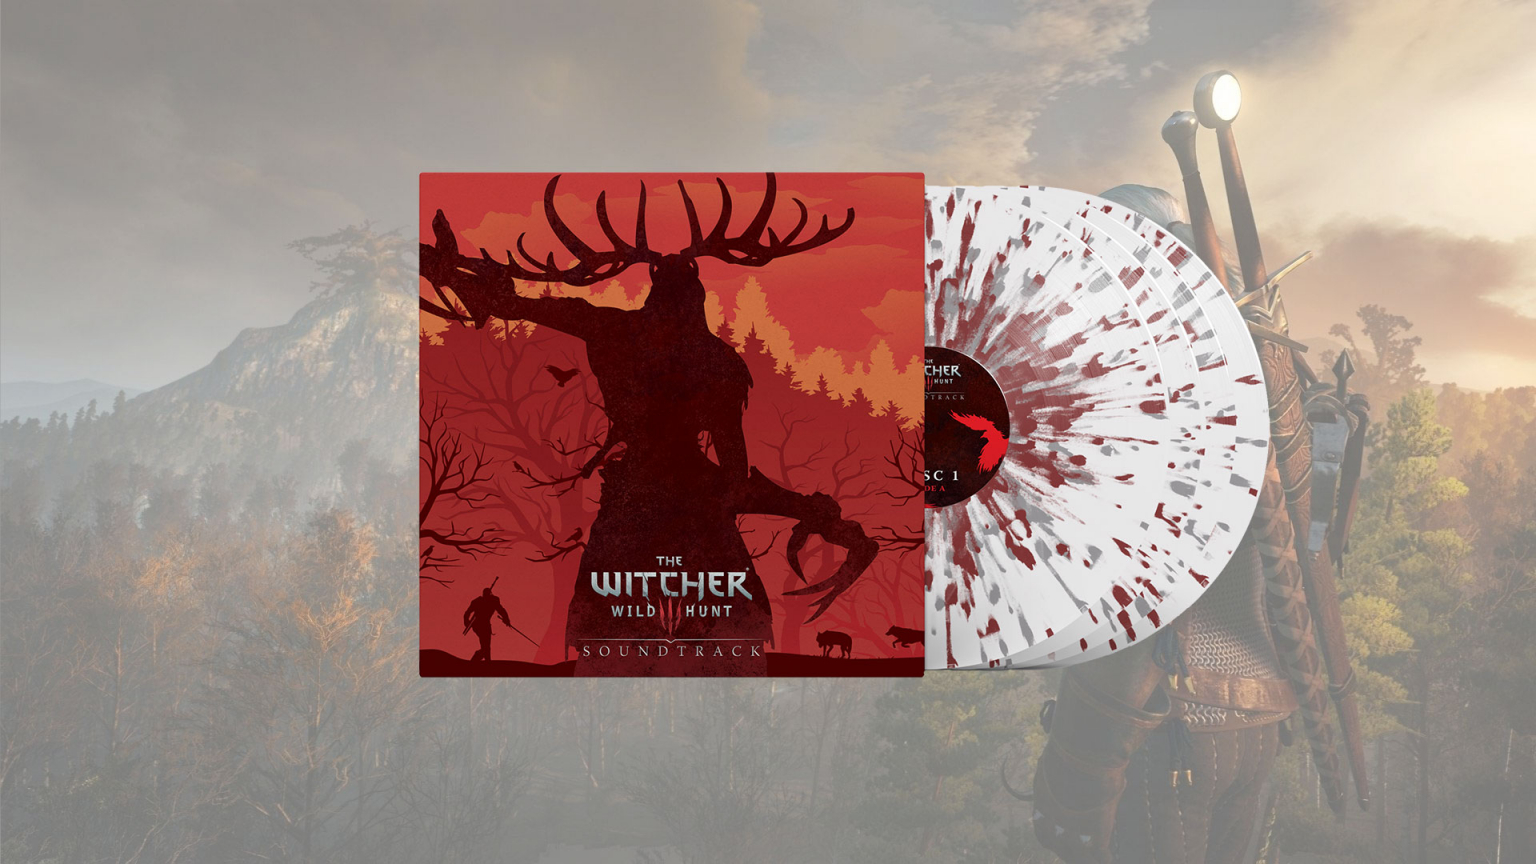 The witcher 3 soundtrack by фото 19